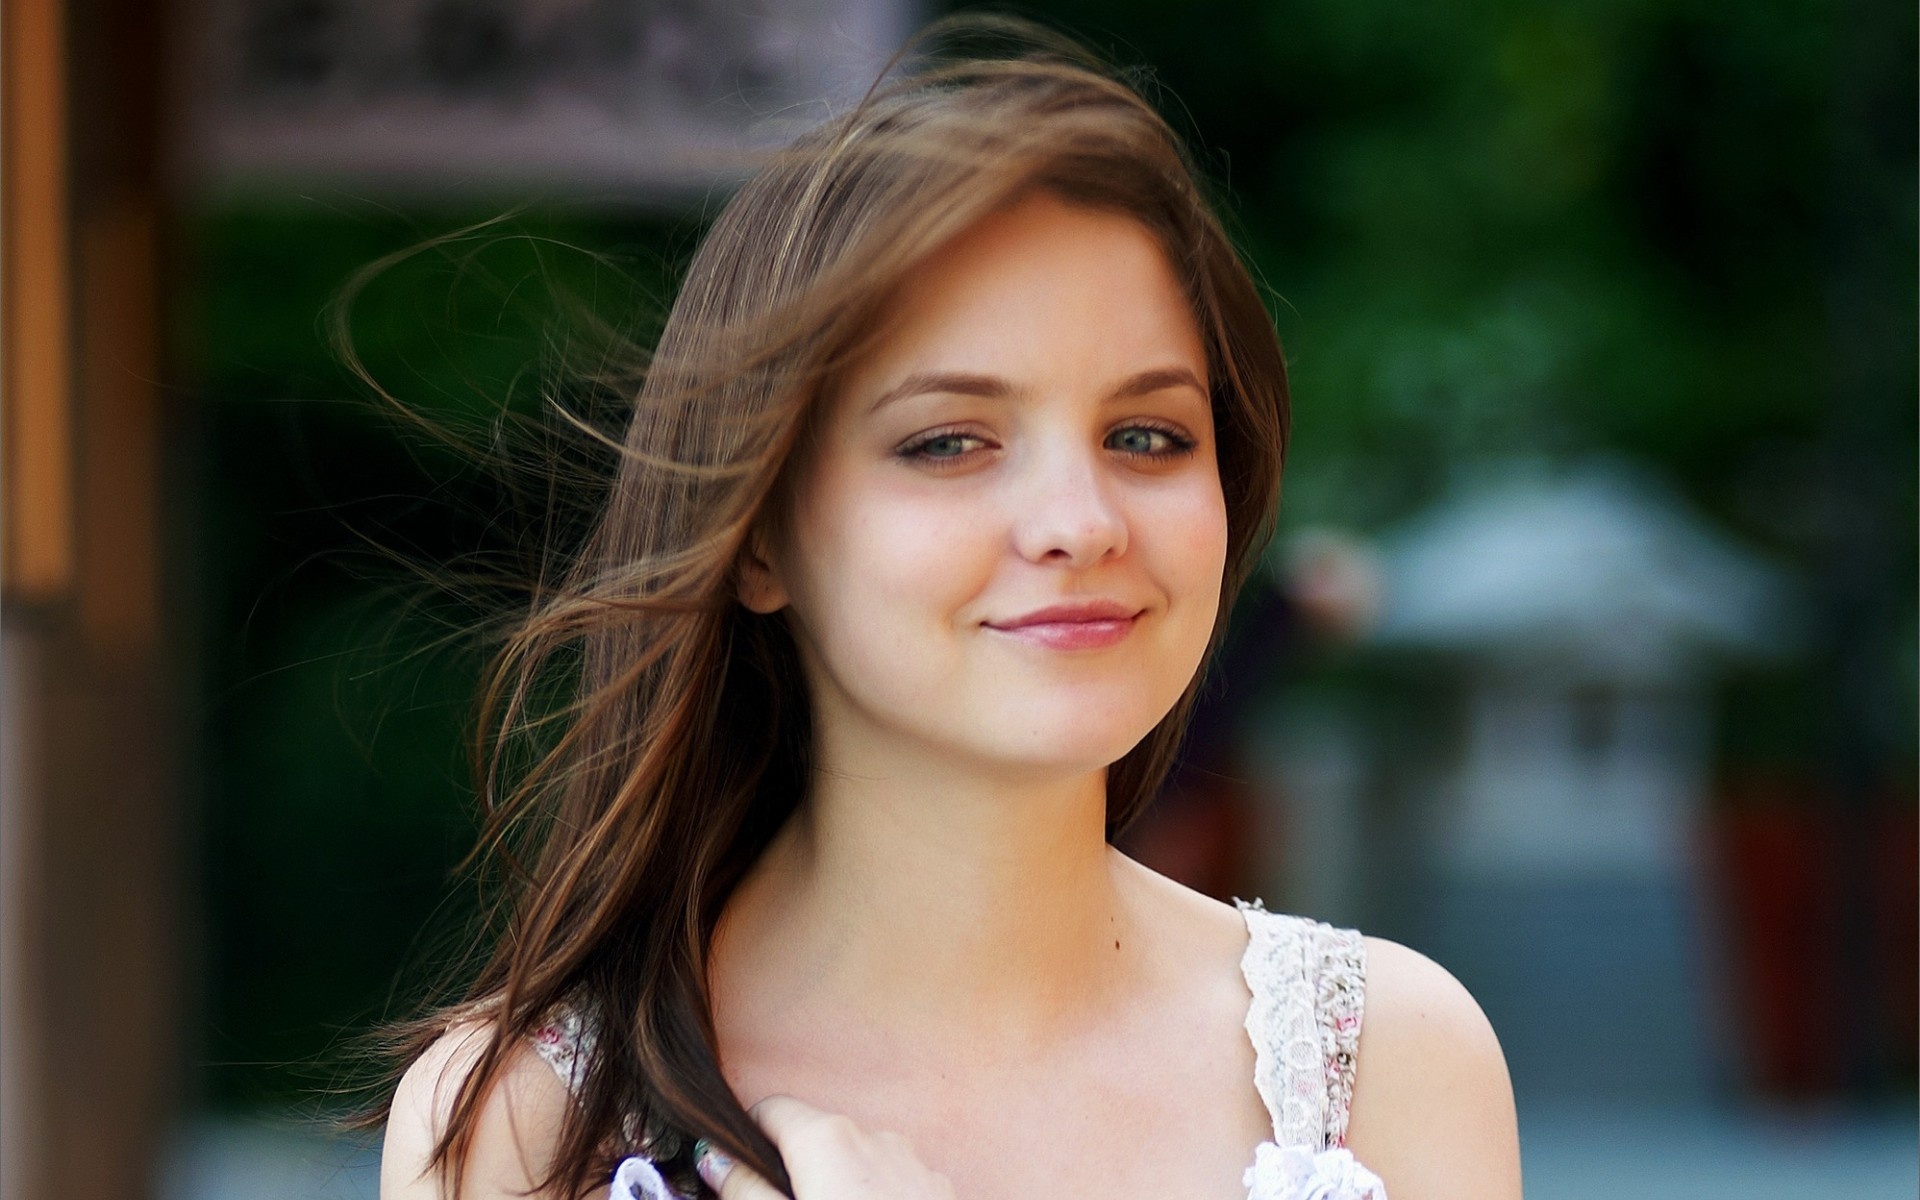 30+ Cute Girls With Dimples - Barnorama